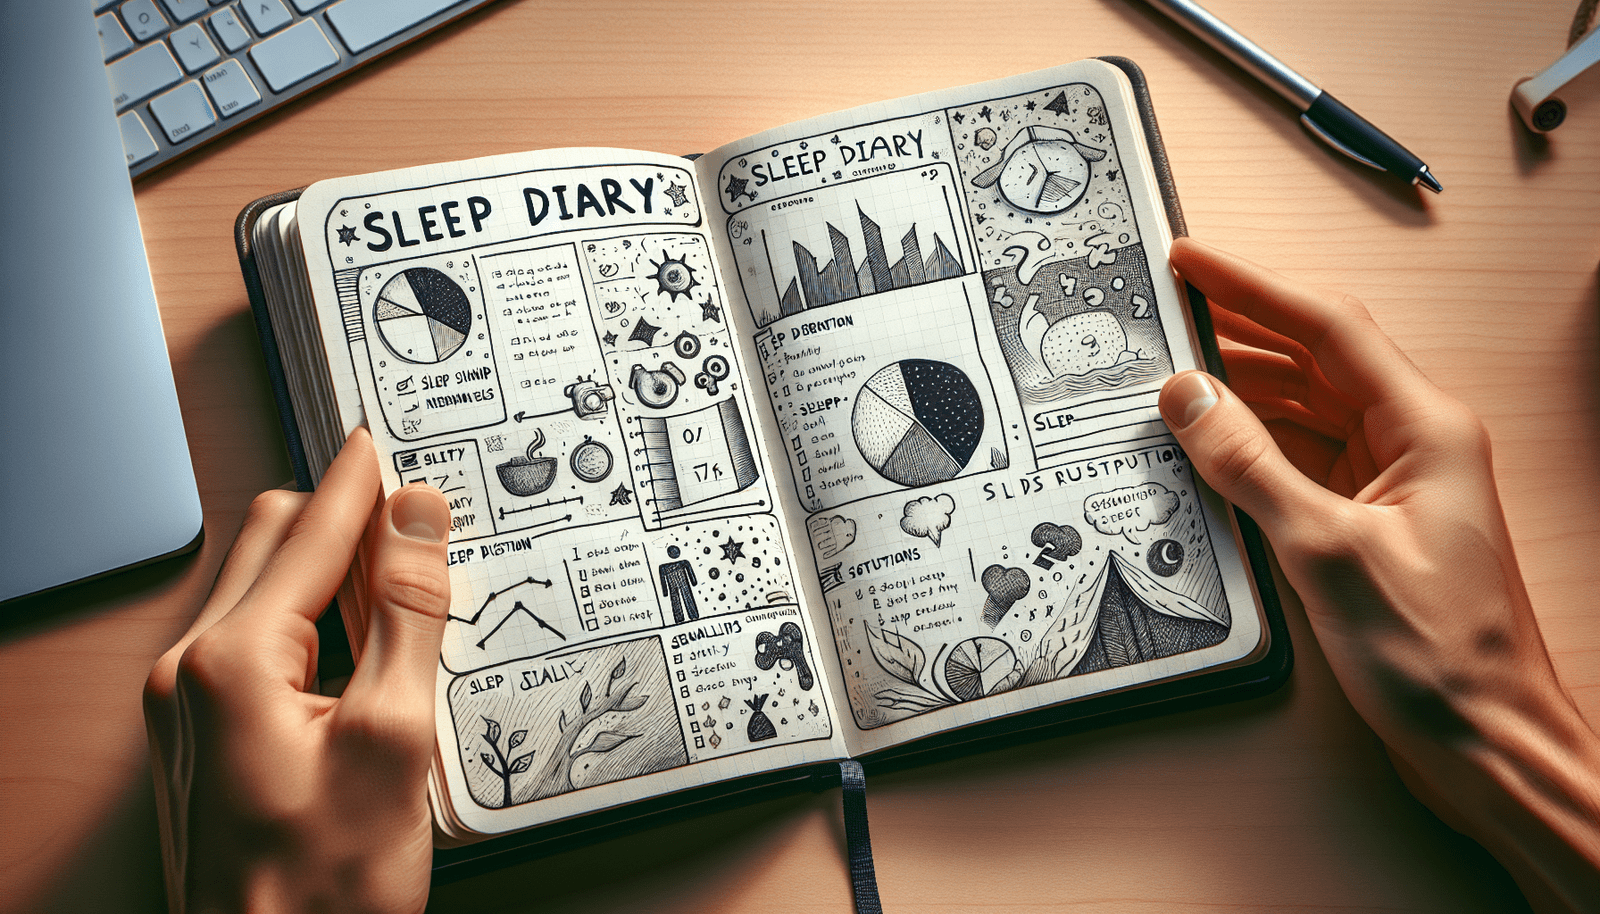 What Is A Sleep Diary, And How Can It Help?